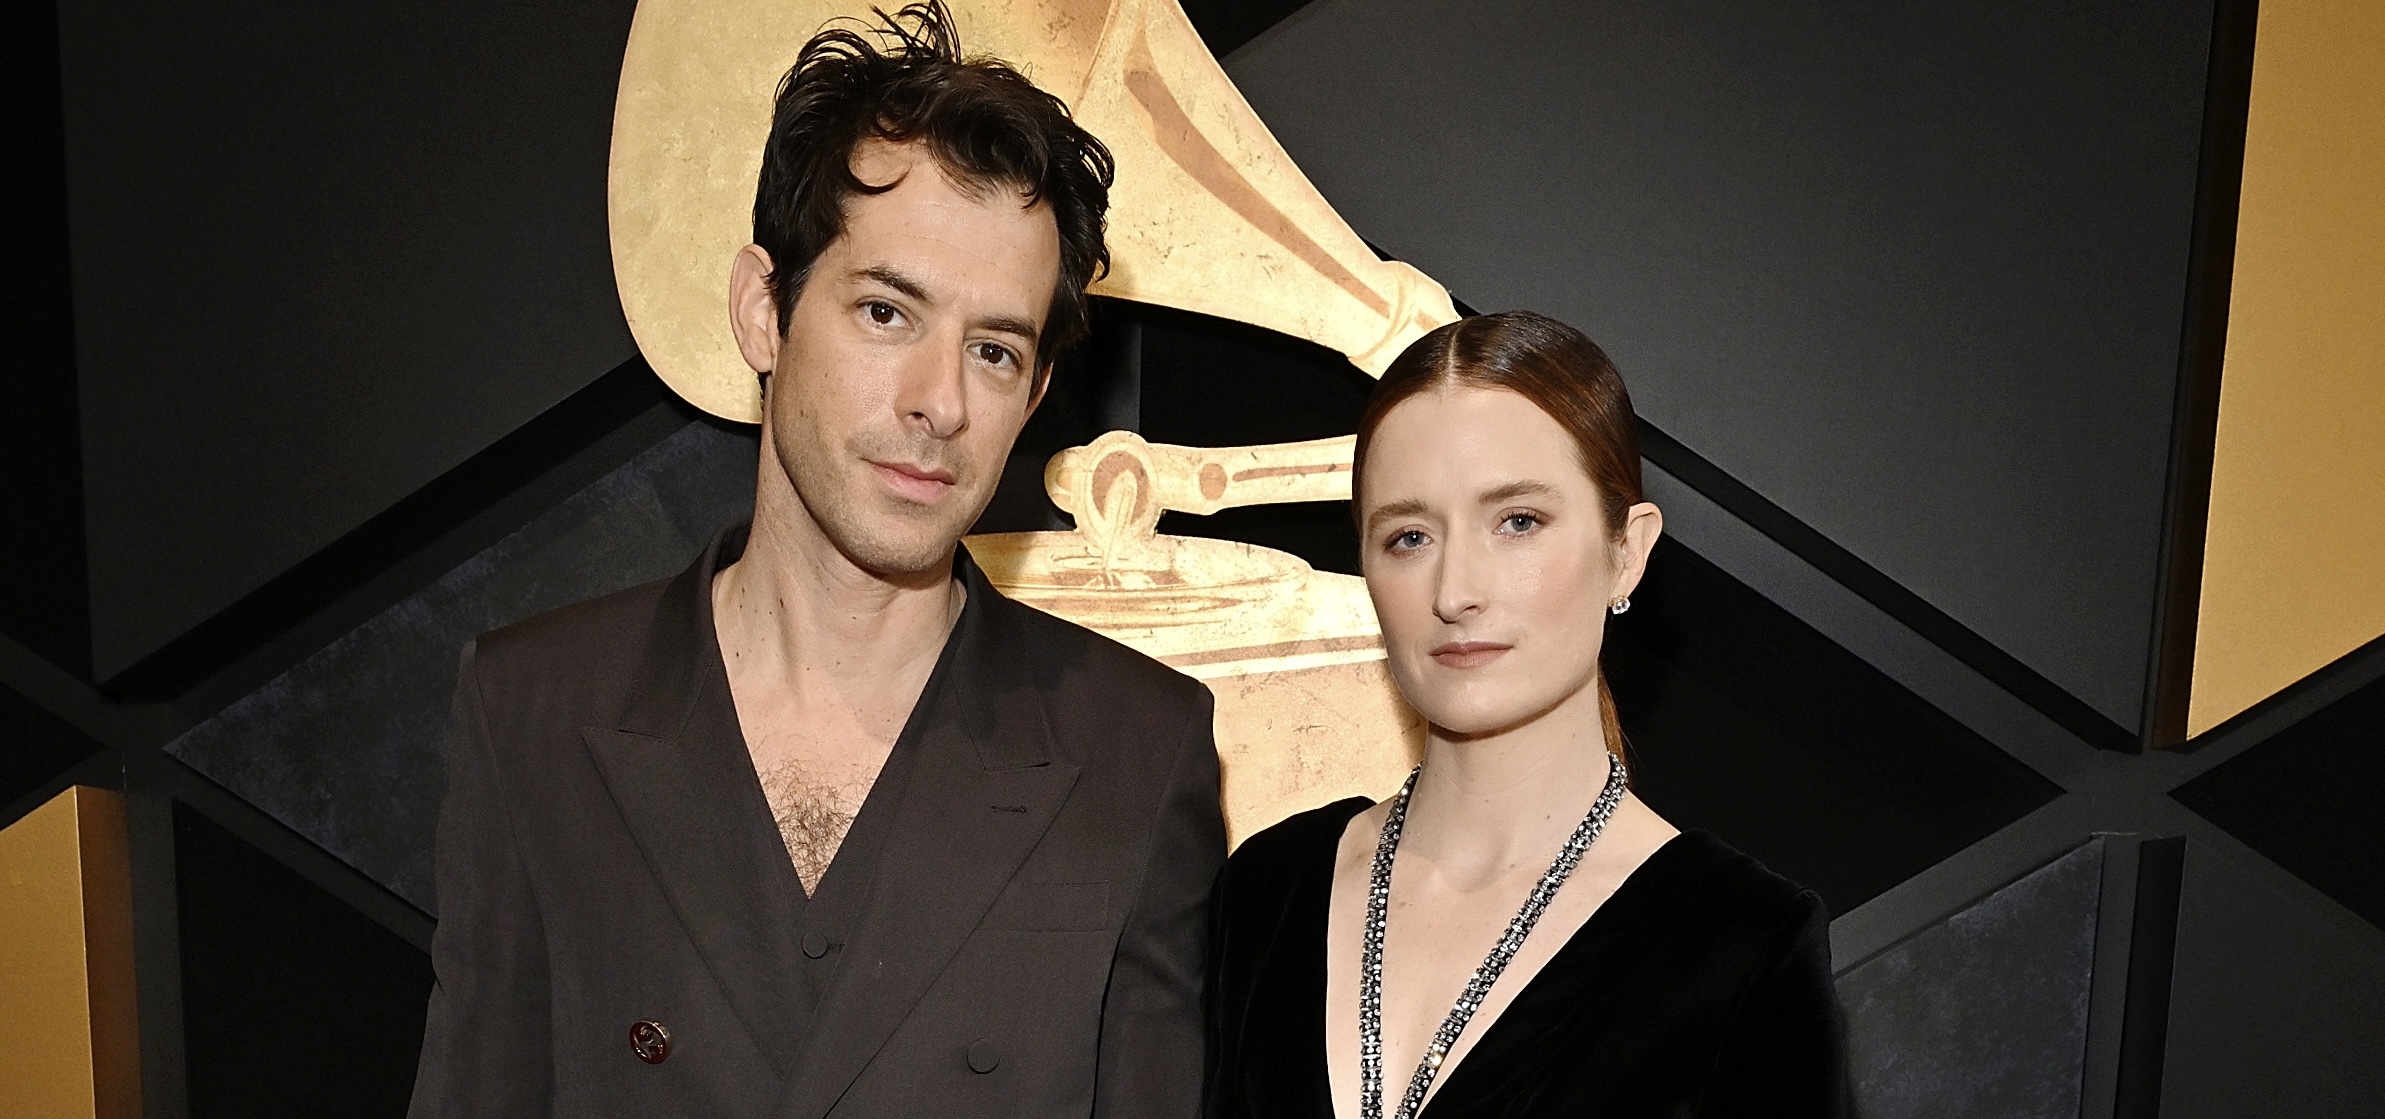 Mark Ronson and Grace Gummer pose together at the 66th GRAMMY Awards, with Mark in a double-breasted, dark suit and Grace in a black velvet dress with a bold cutout and high slit.